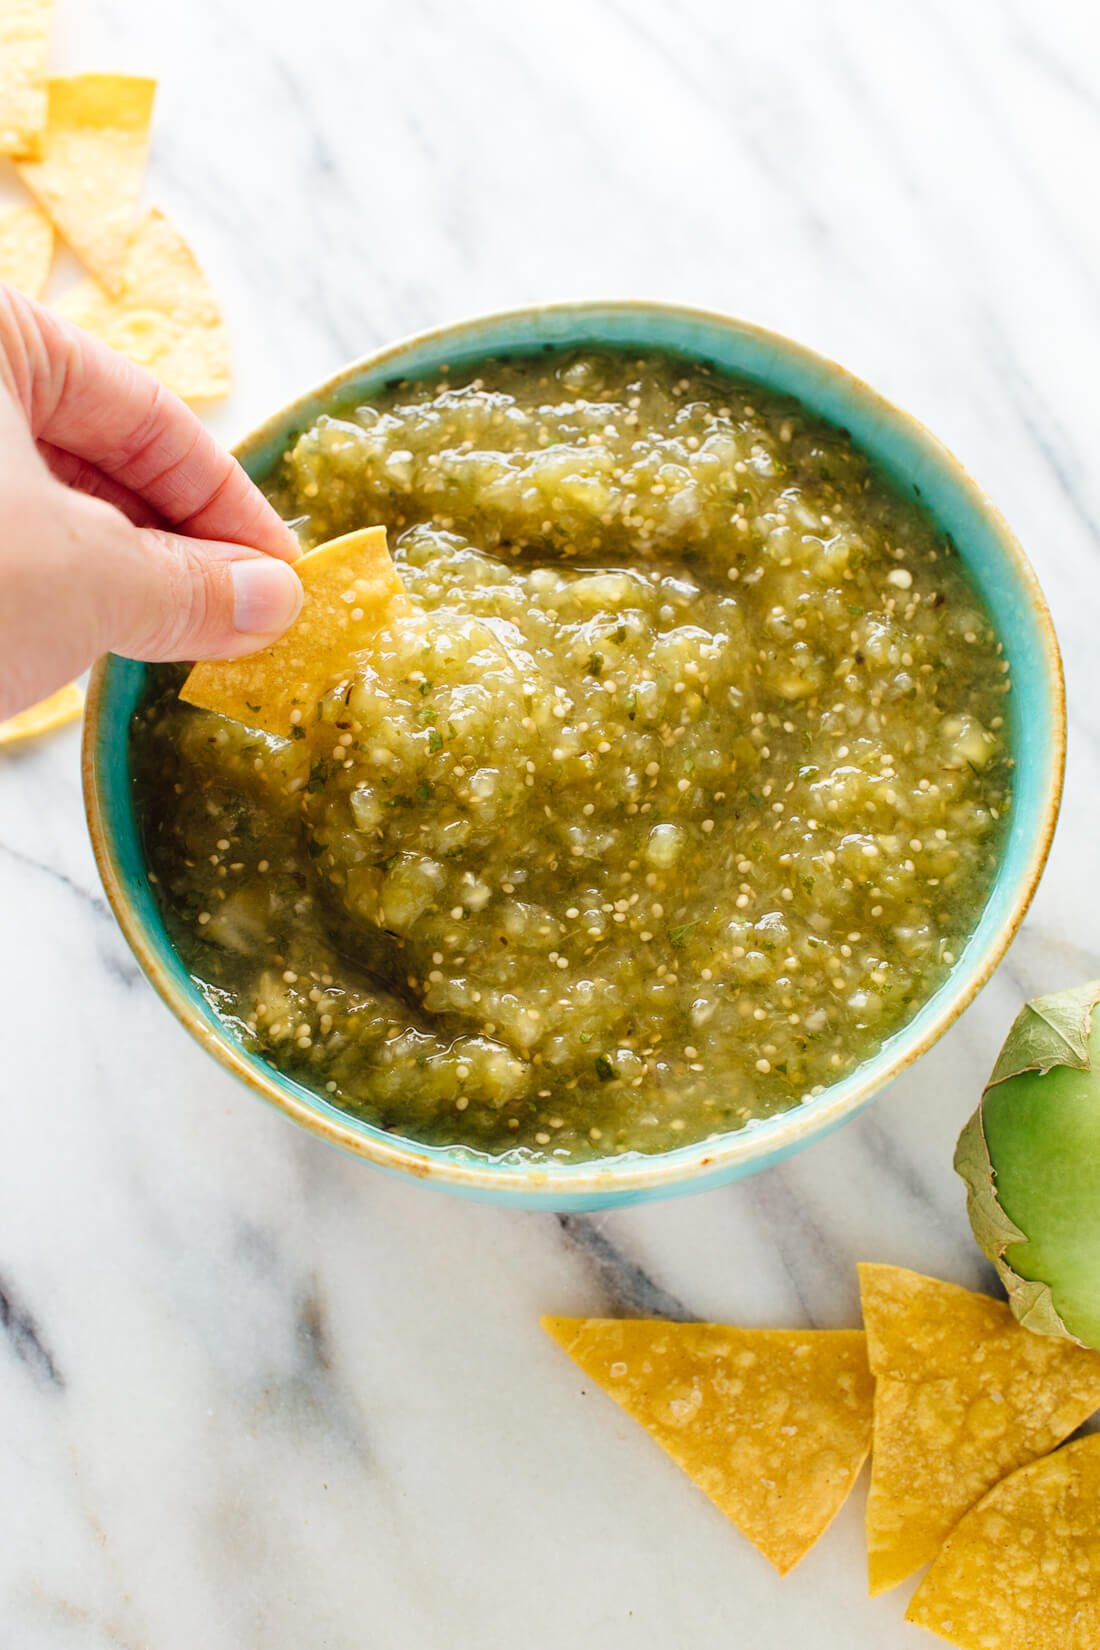 Once you try this roasted salsa verde recipe, you'll never go back! cookieandkate.com